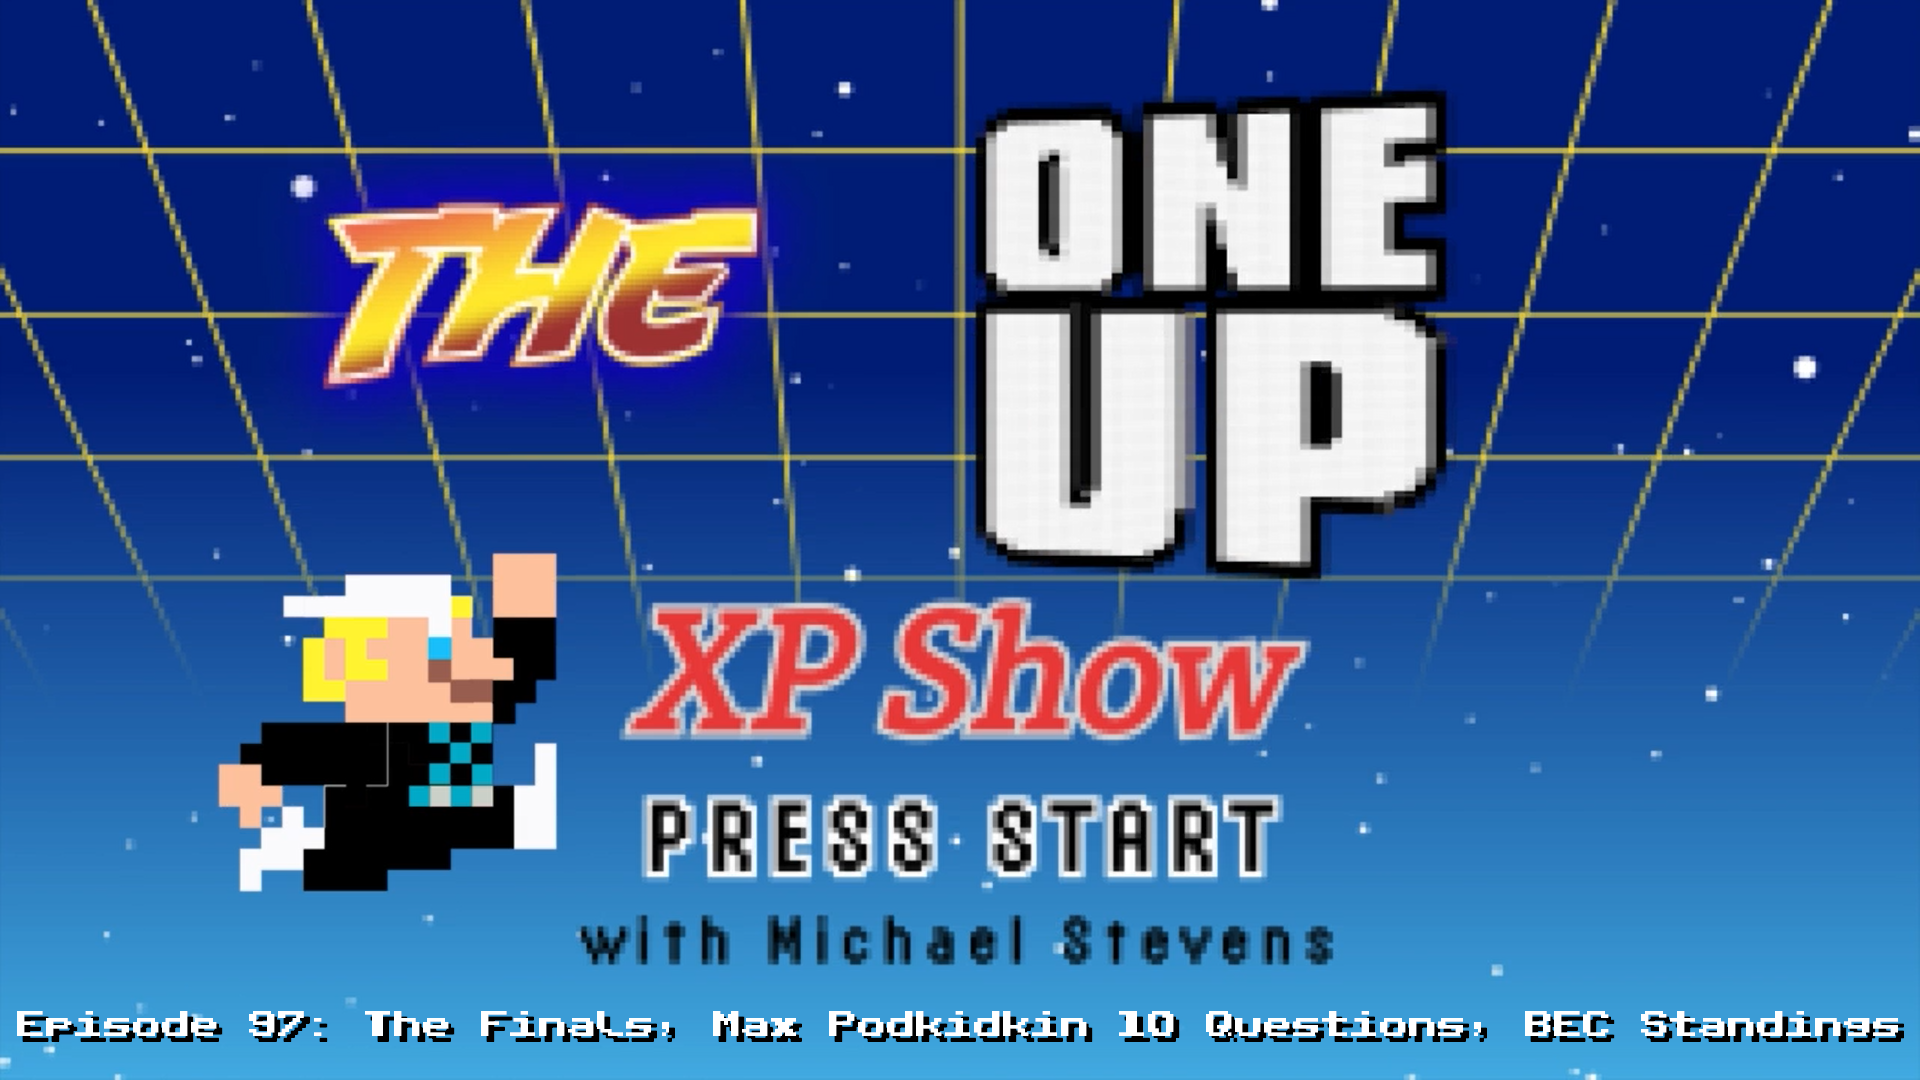 The One Up XP Show - Episode 97: The Finals, Bisect Hosting 10 Questions, BEC Standings